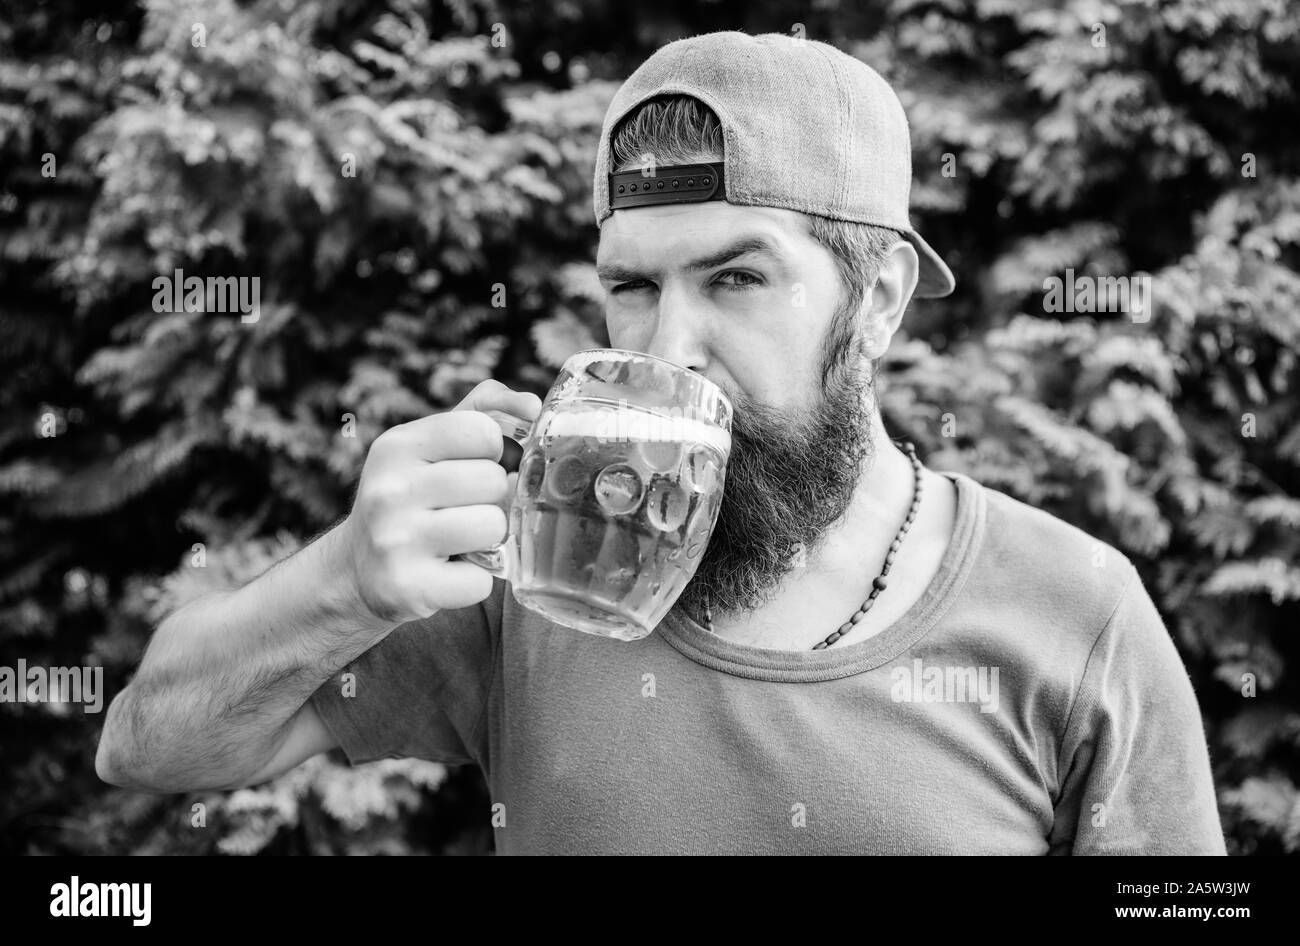 Preferring alcohol free beer. Drinker having refreshing alcoholic drink or refresher. Alcohol addict on summer nature. Suffering from alcohol addiction and bad habits. Controling his alcohol abuse. Stock Photo